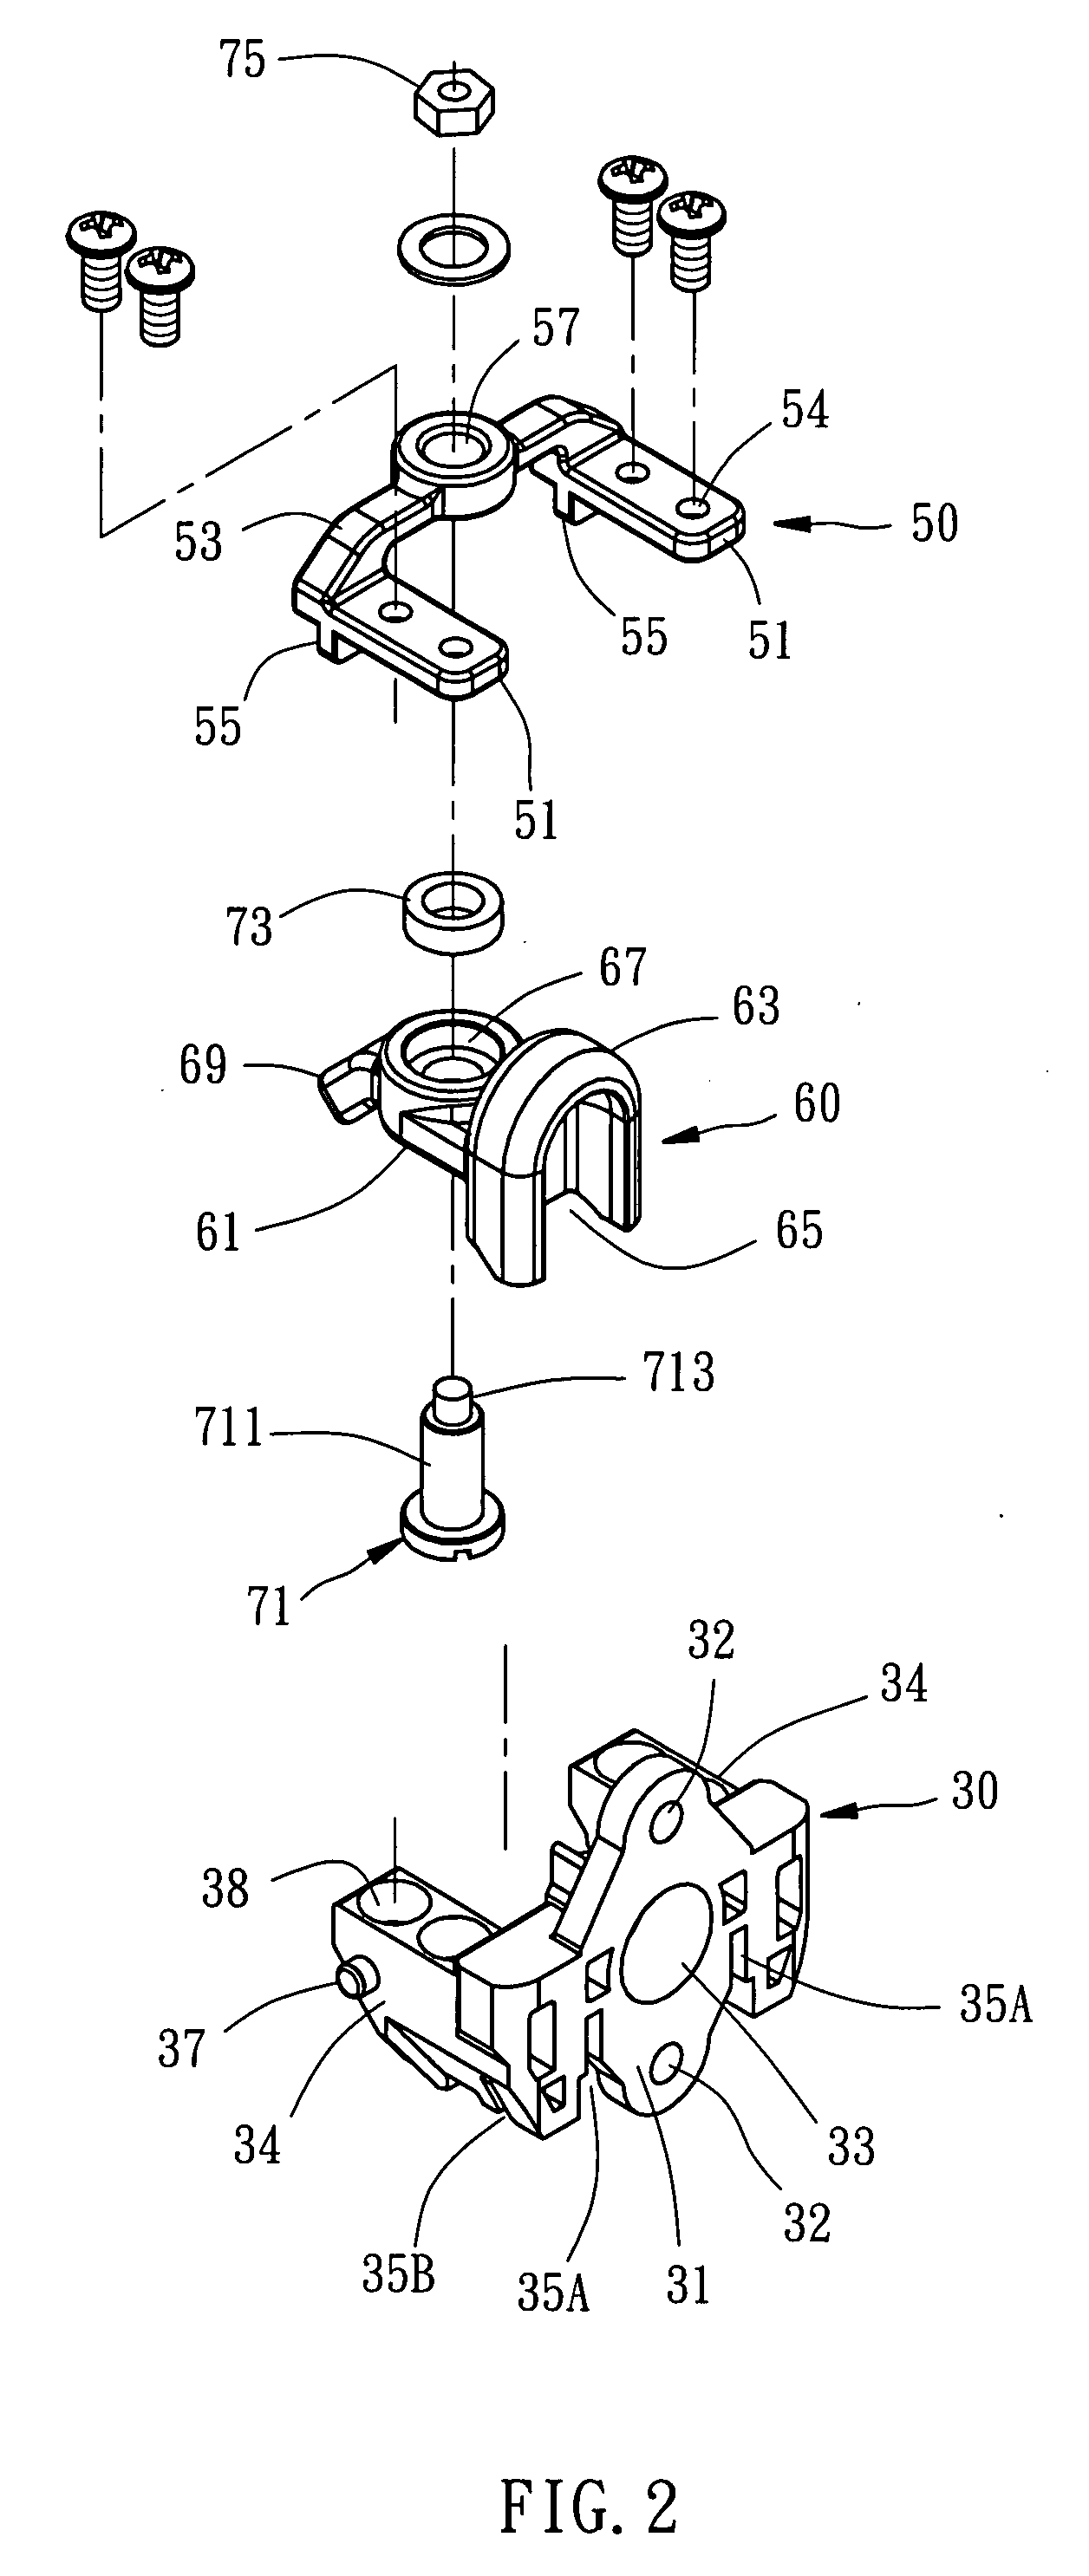 Hair clipper with improved mounting structures